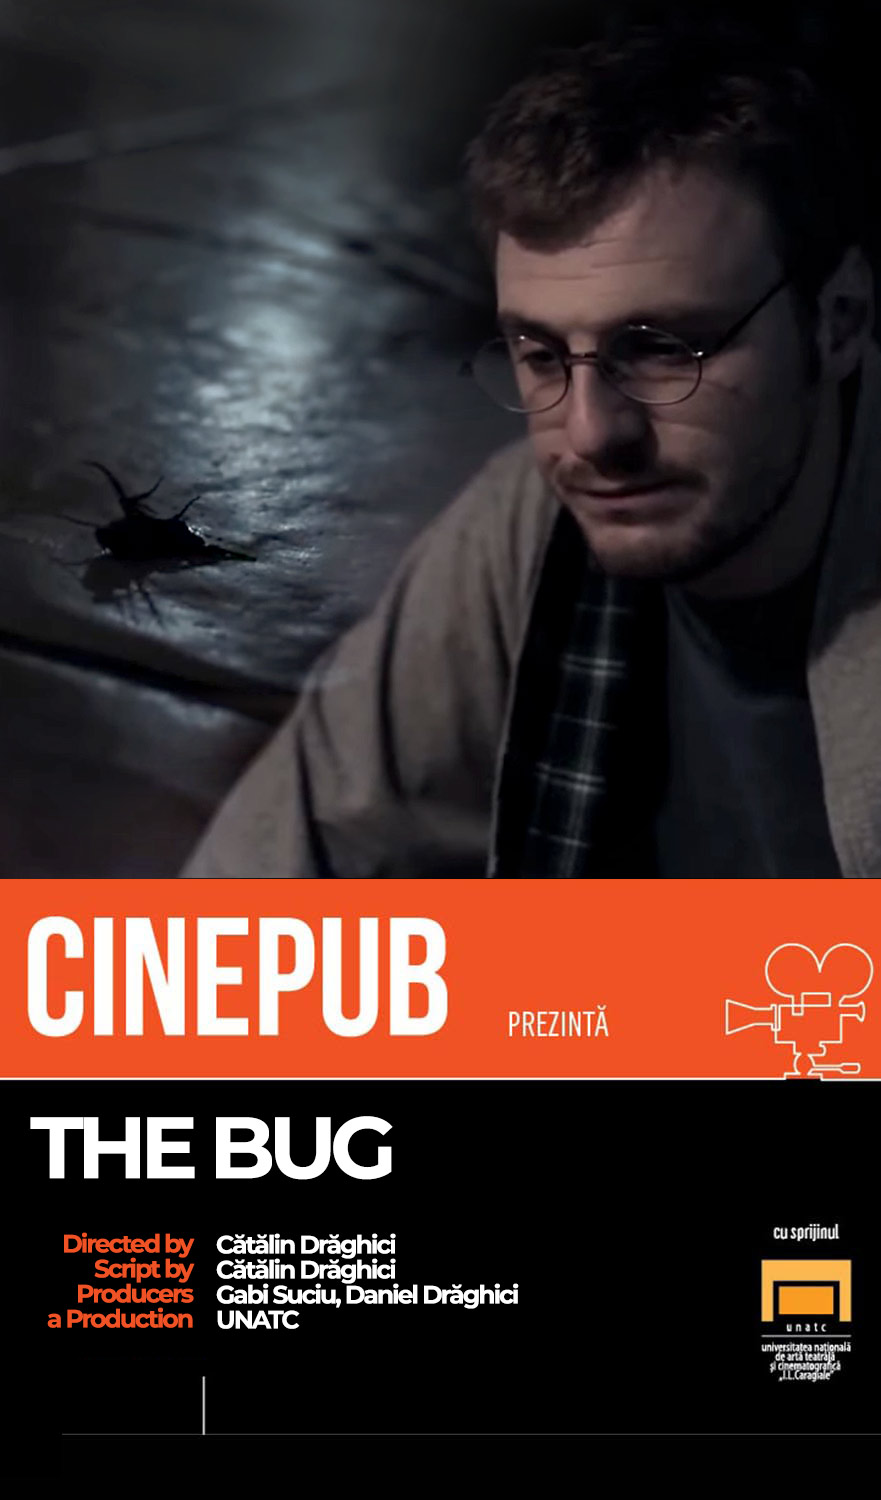 THE BUG directed by Catalin Draghici - UNATC short film online on CINEPUB